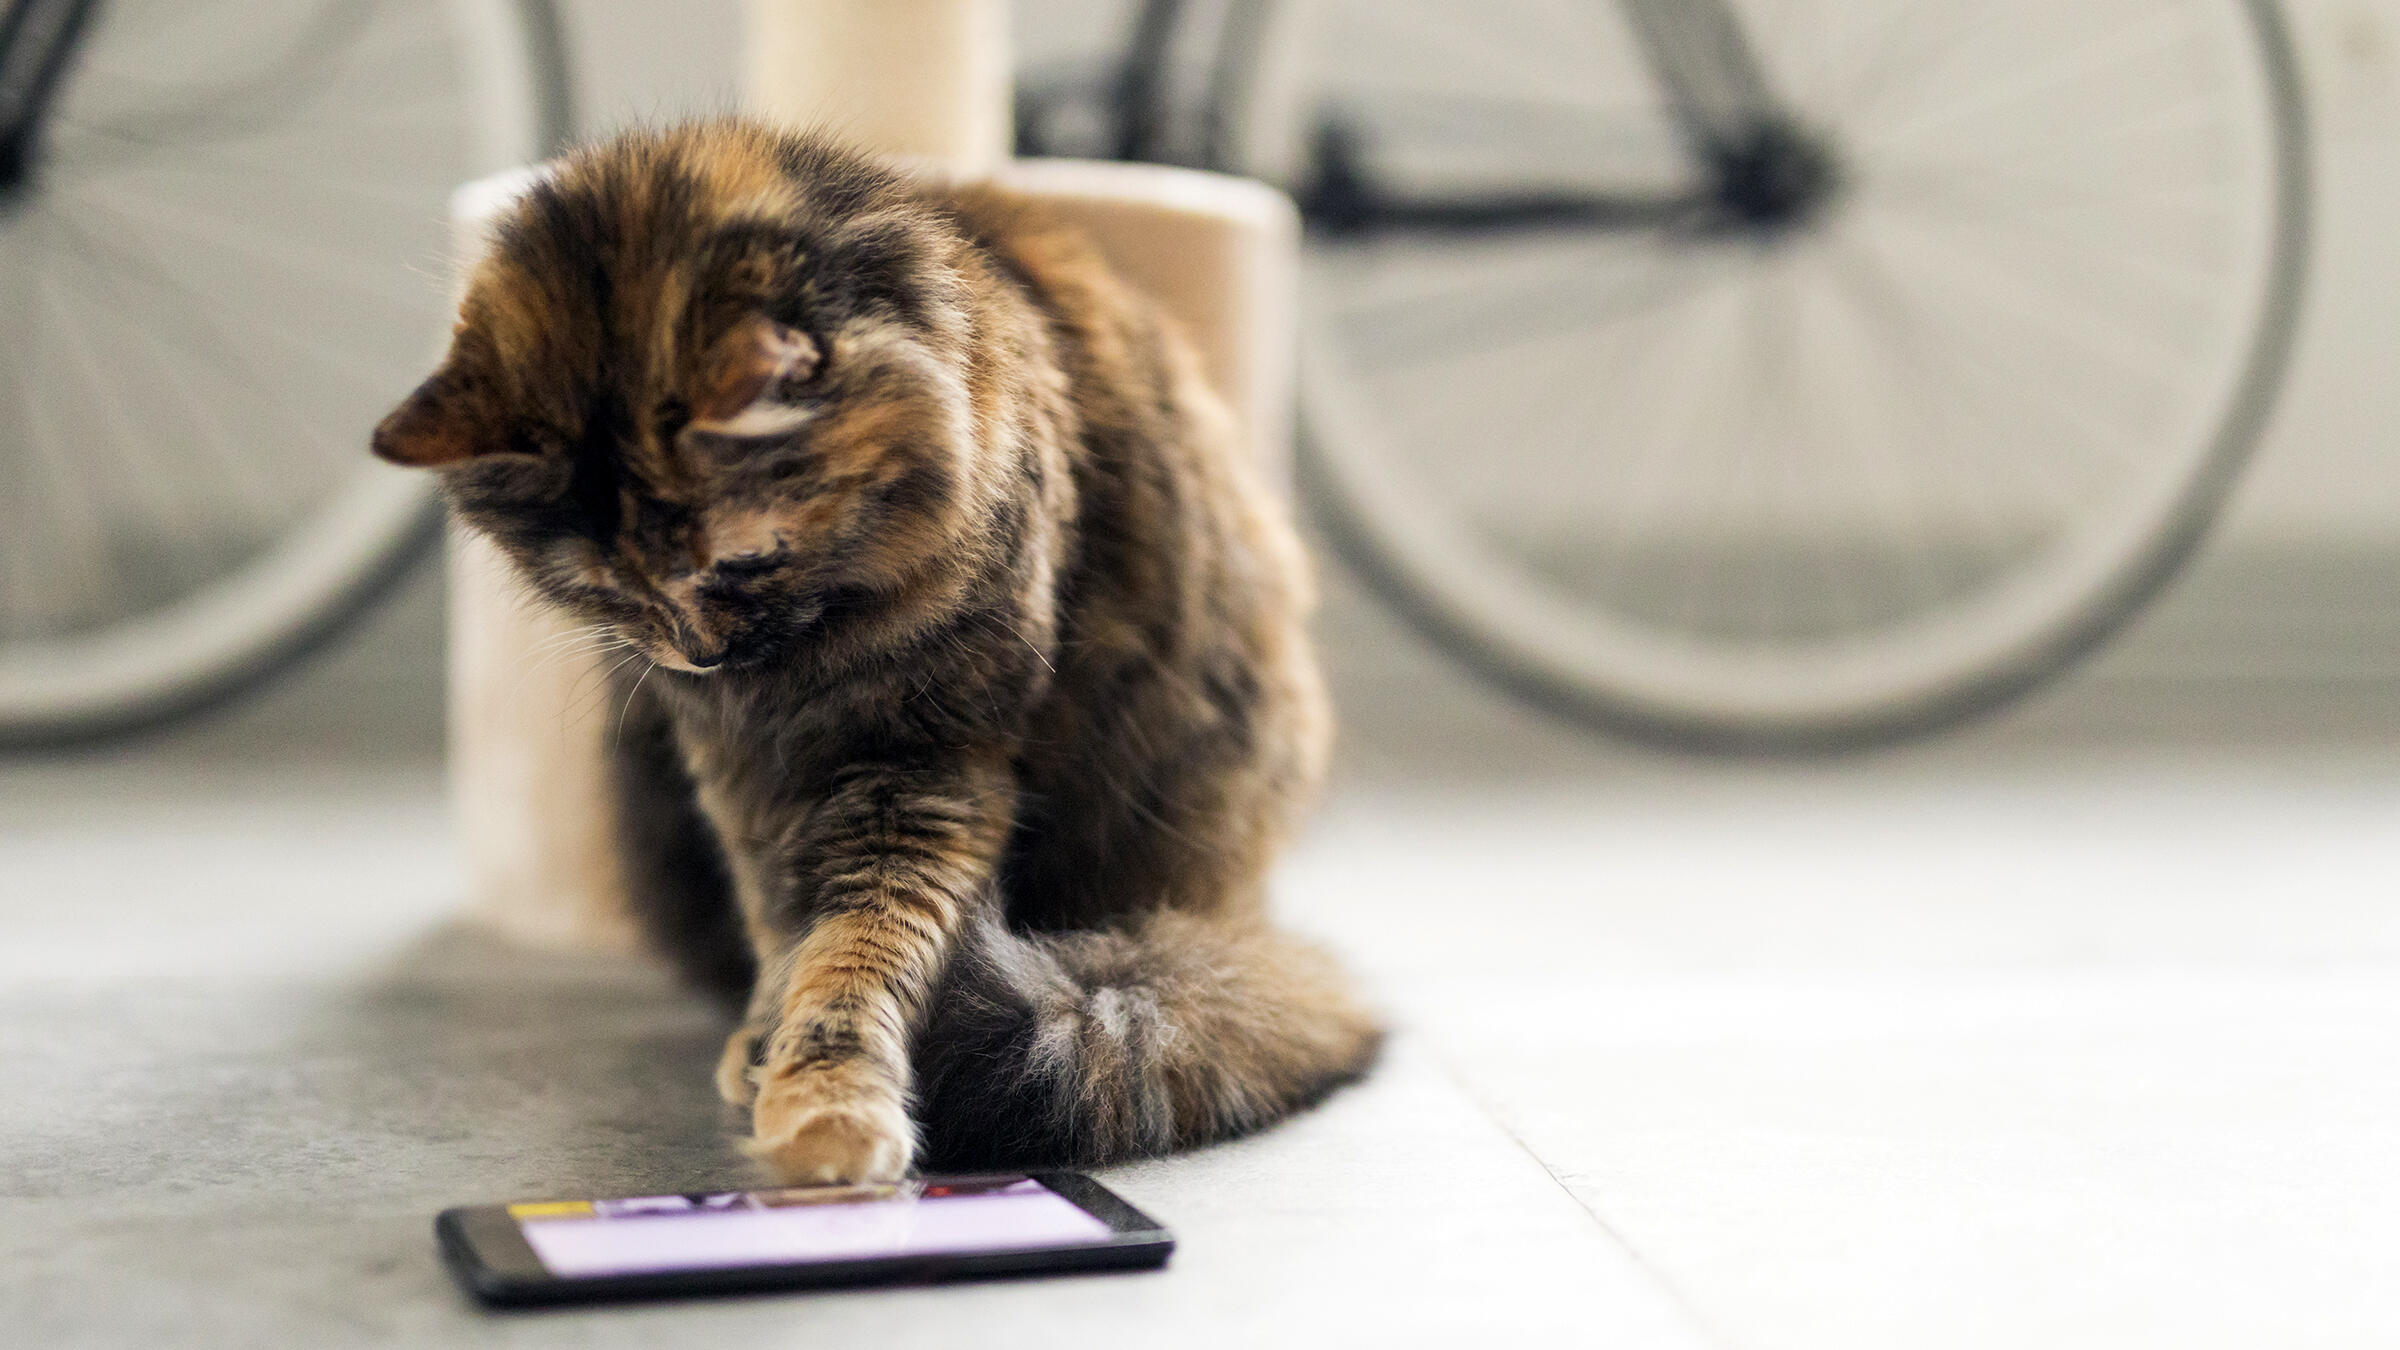 amuse-your-feline-friend-with-the-5-best-apps-for-cats-and-cat-owners